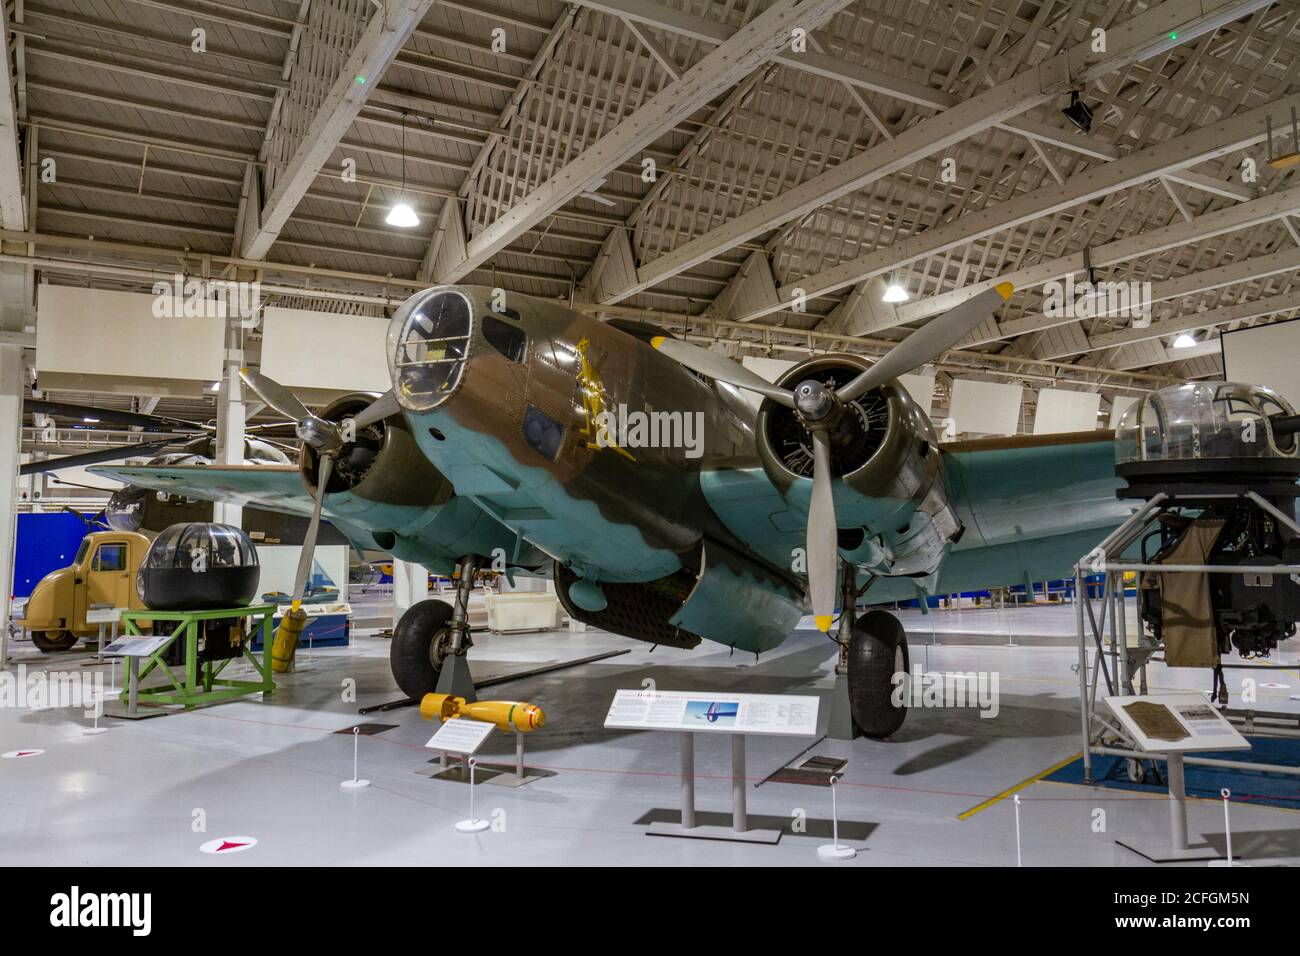 A Lockheed Hudson maritime reconnaissance aircraft (1939-46) on display in the RAF Museum, London, UK. Stock Photo